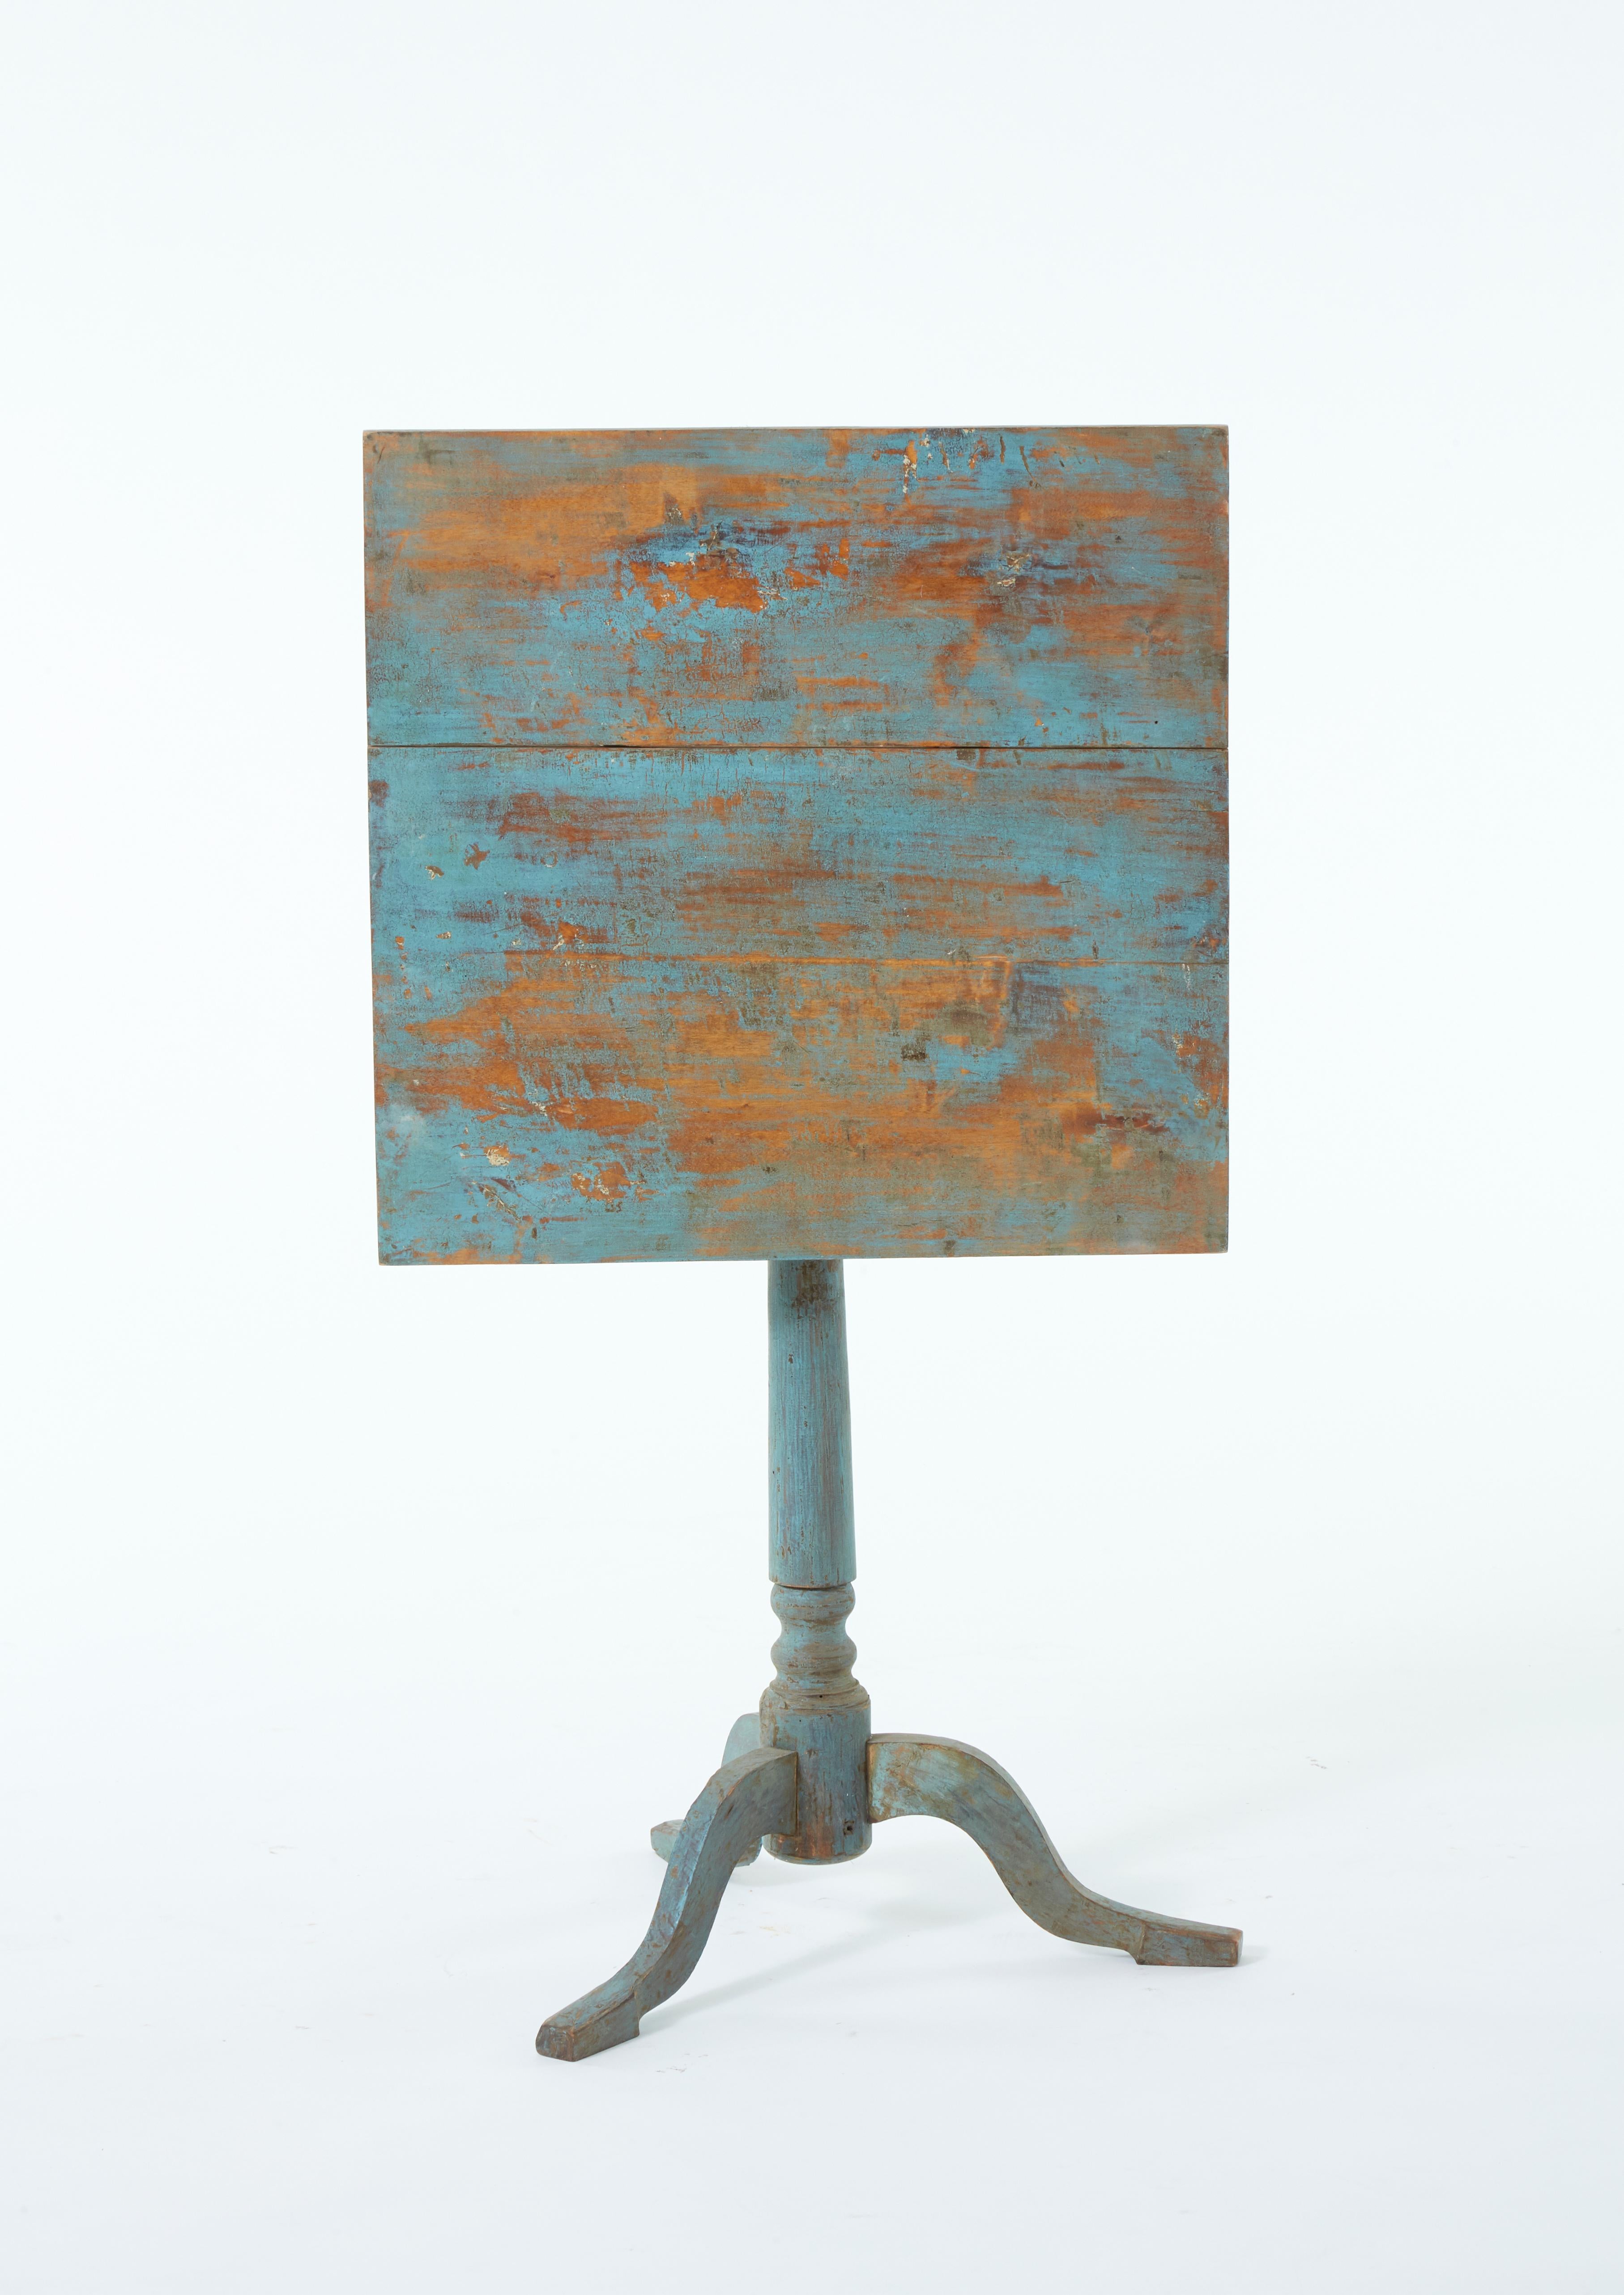 Antique Swedish tilt-top table in famous Dalarna blue from the historical Dalarna province, circa 1830. Original paint. Perfect side table or accent for entry.

   